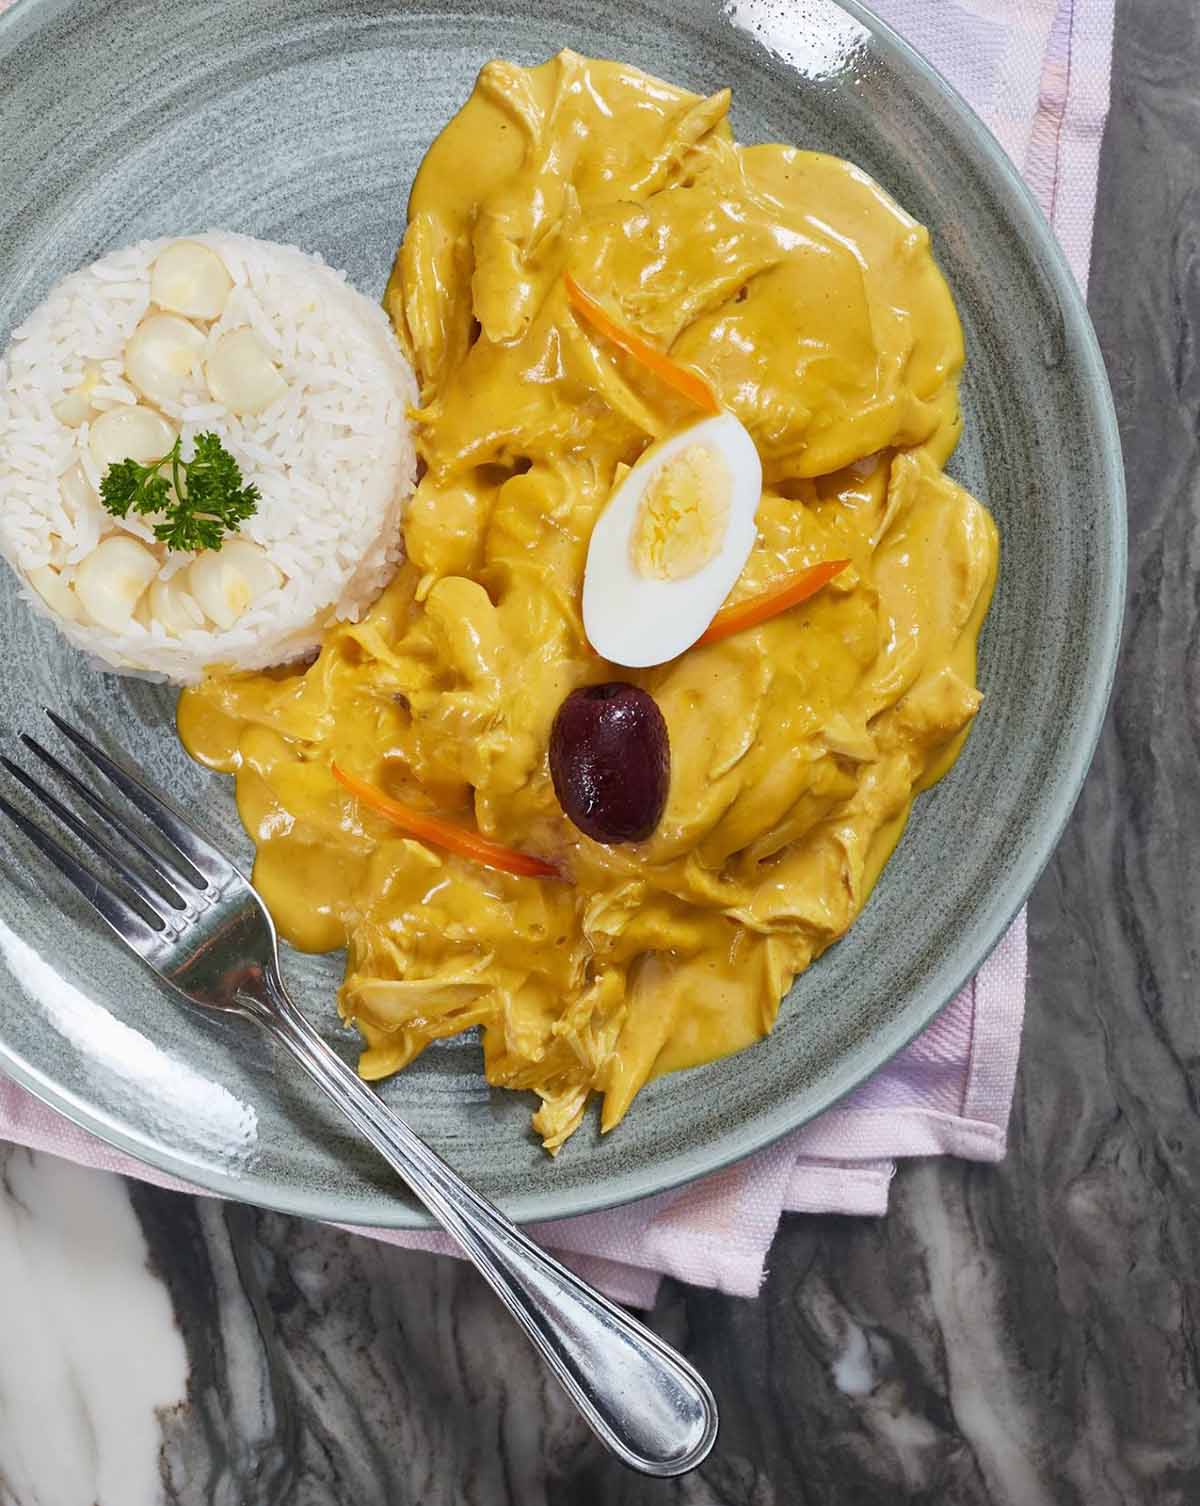 A top Peruvian food, aji de gallina is a yellow chicken stew served with white rice.